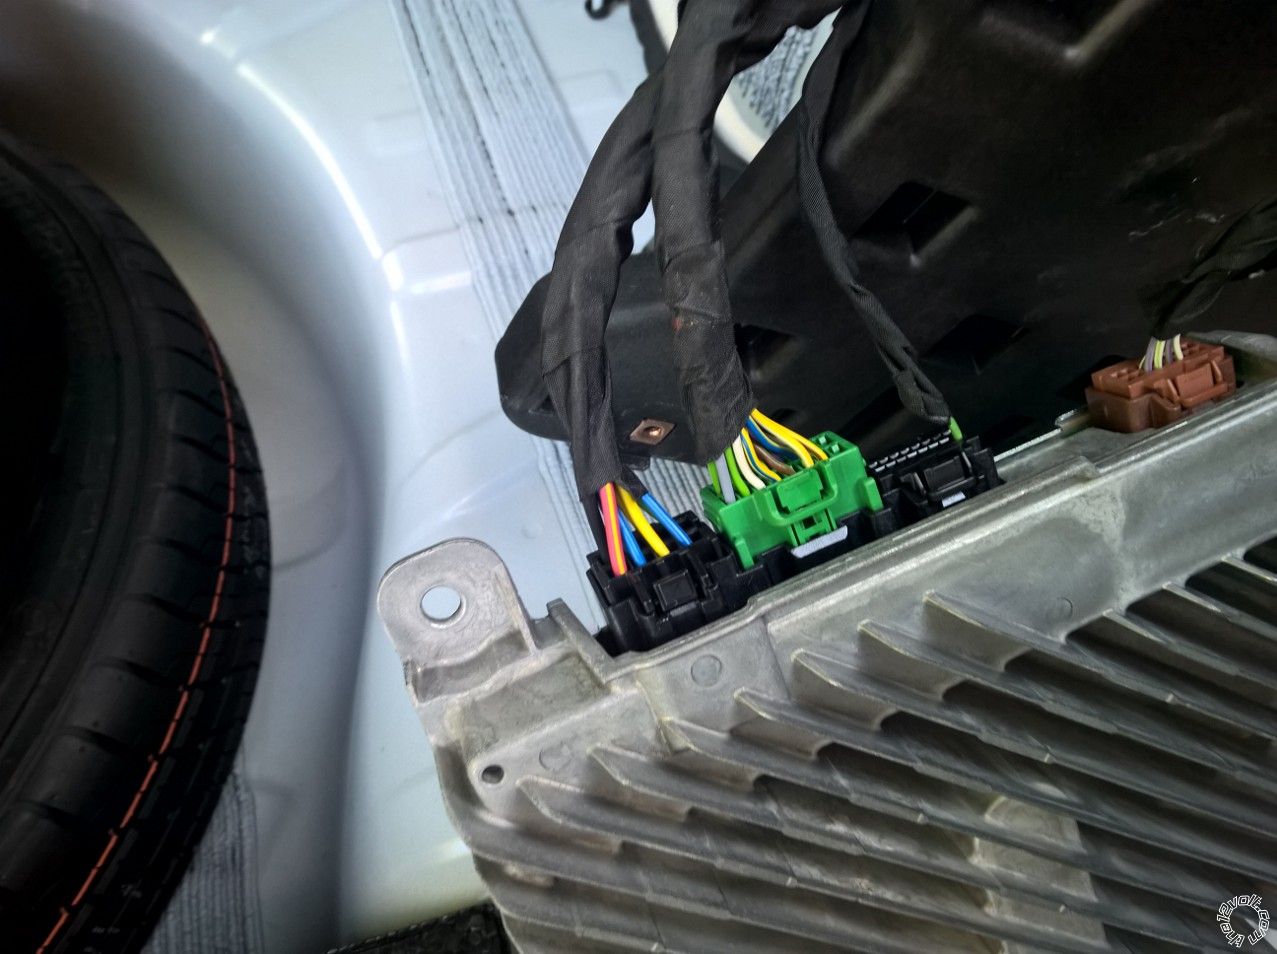 2014 9th Gen Chevrolet Impala, No Sound After Hi/Lo Install - Last Post -- posted image.